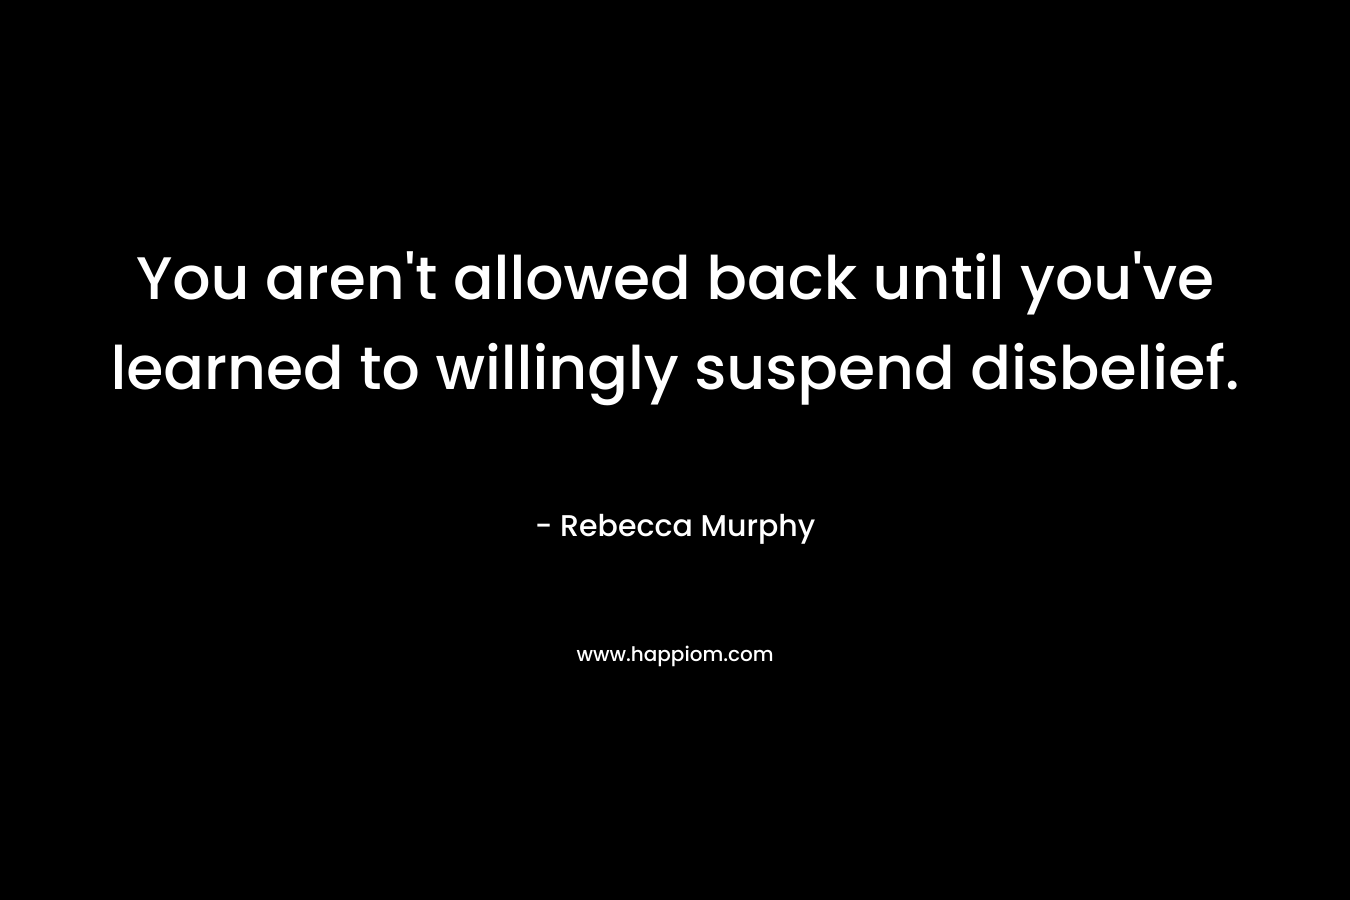 You aren’t allowed back until you’ve learned to willingly suspend disbelief. – Rebecca Murphy